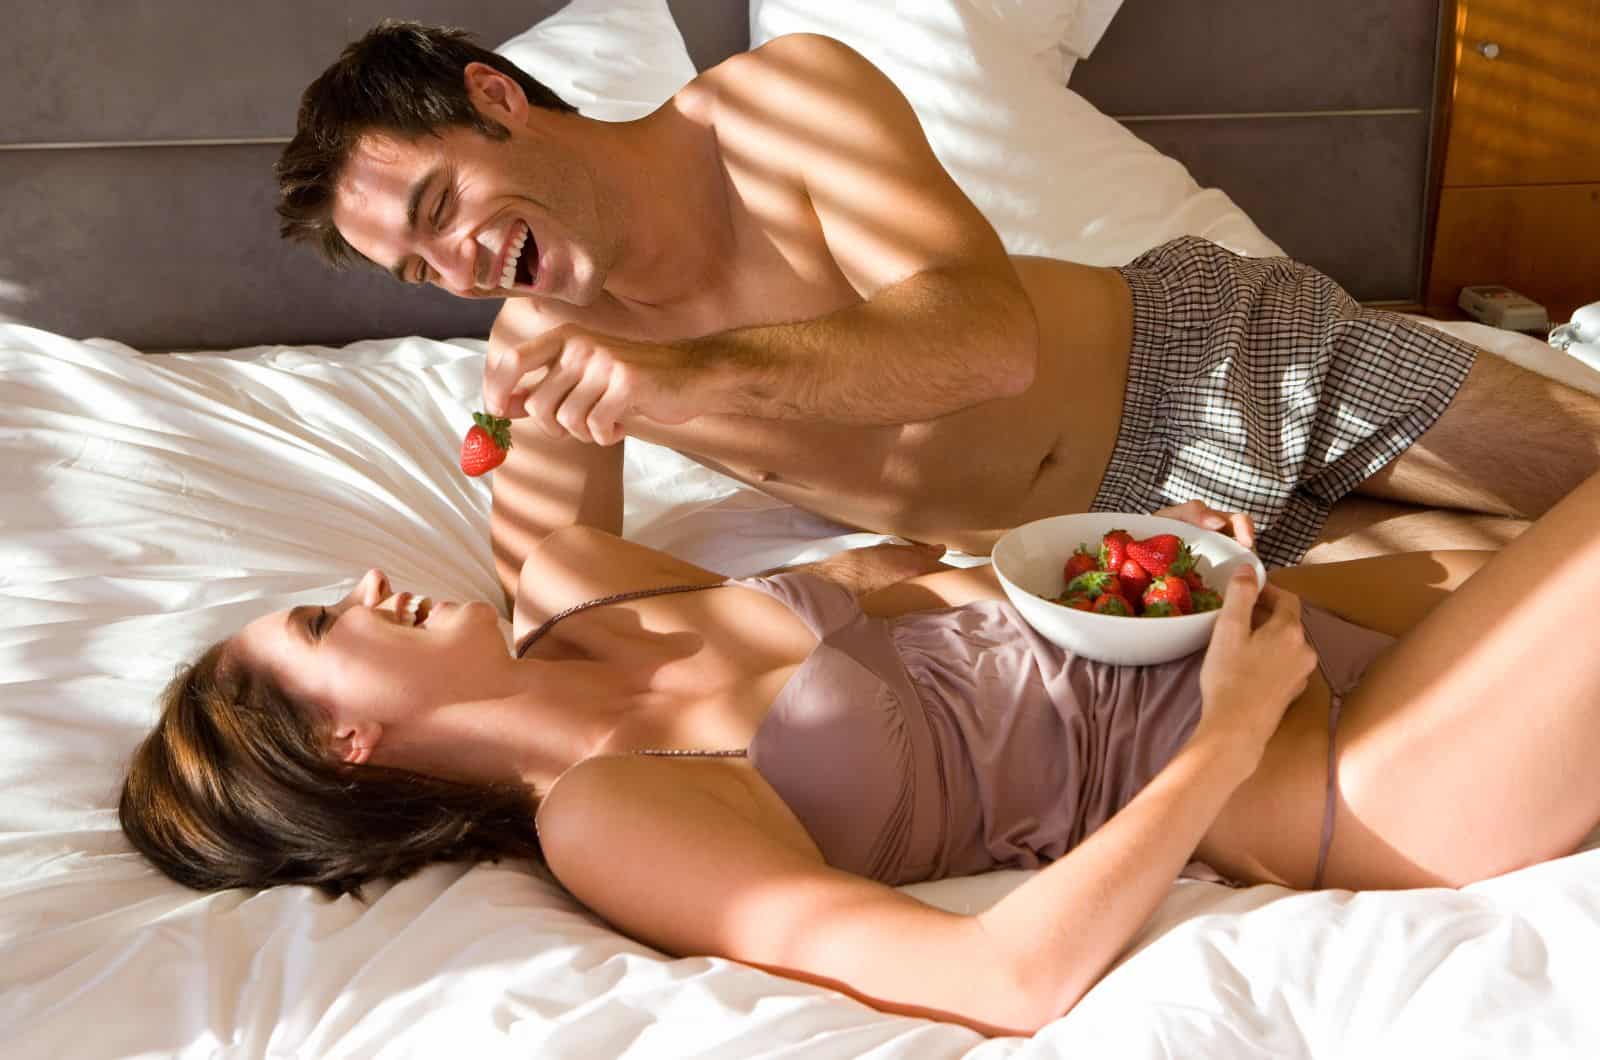 man feeding woman strawberry in bed while they're both in underwear